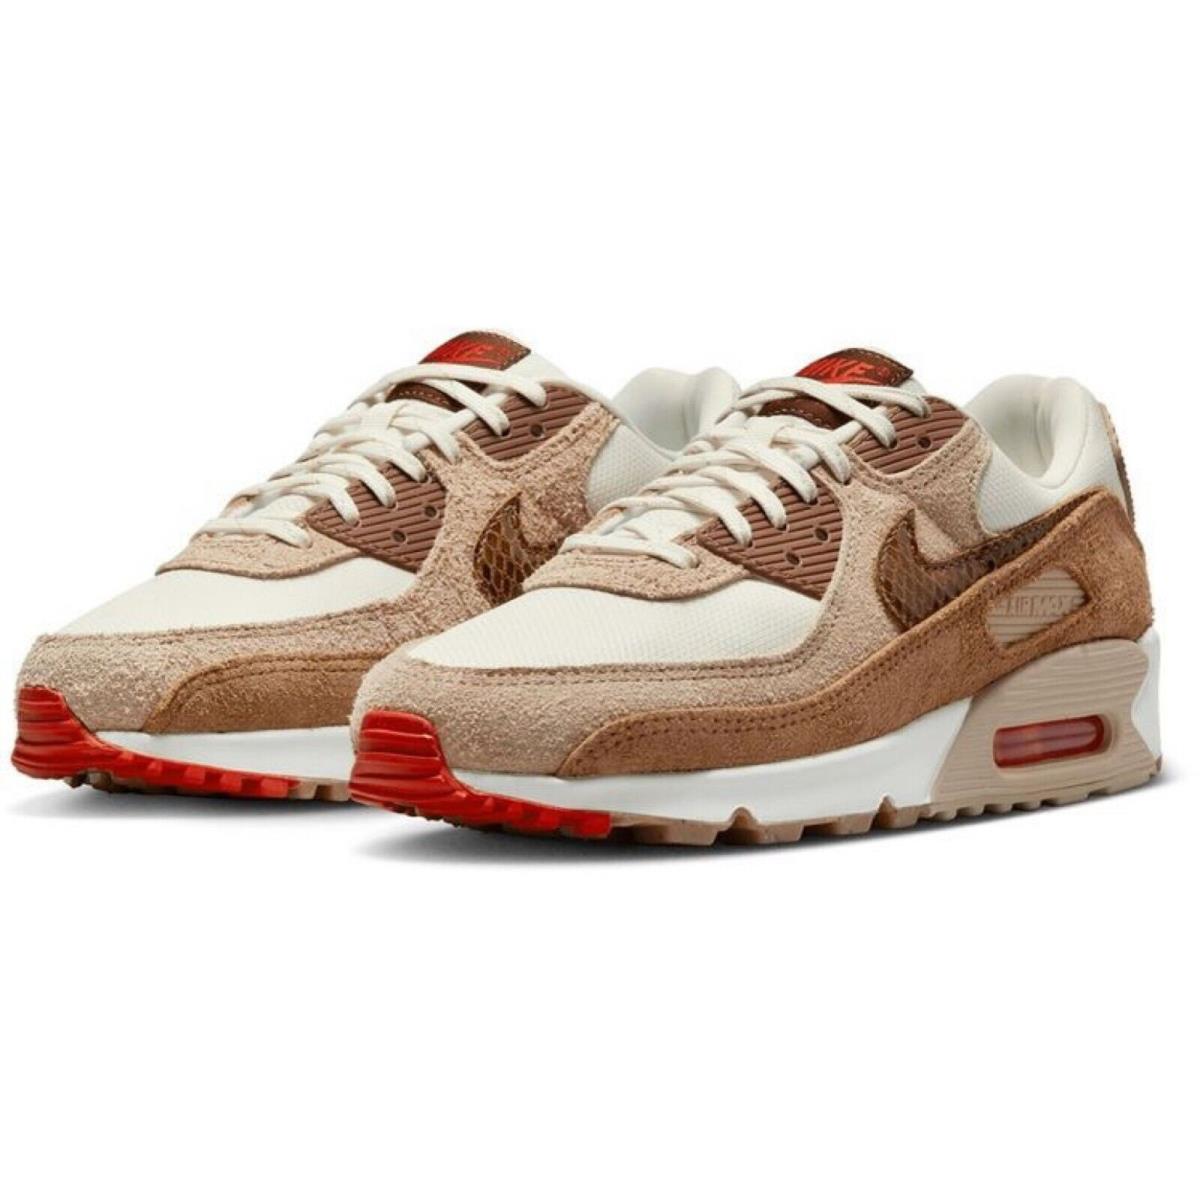 Nike shoes Air Max - Brown , White/red Manufacturer 19